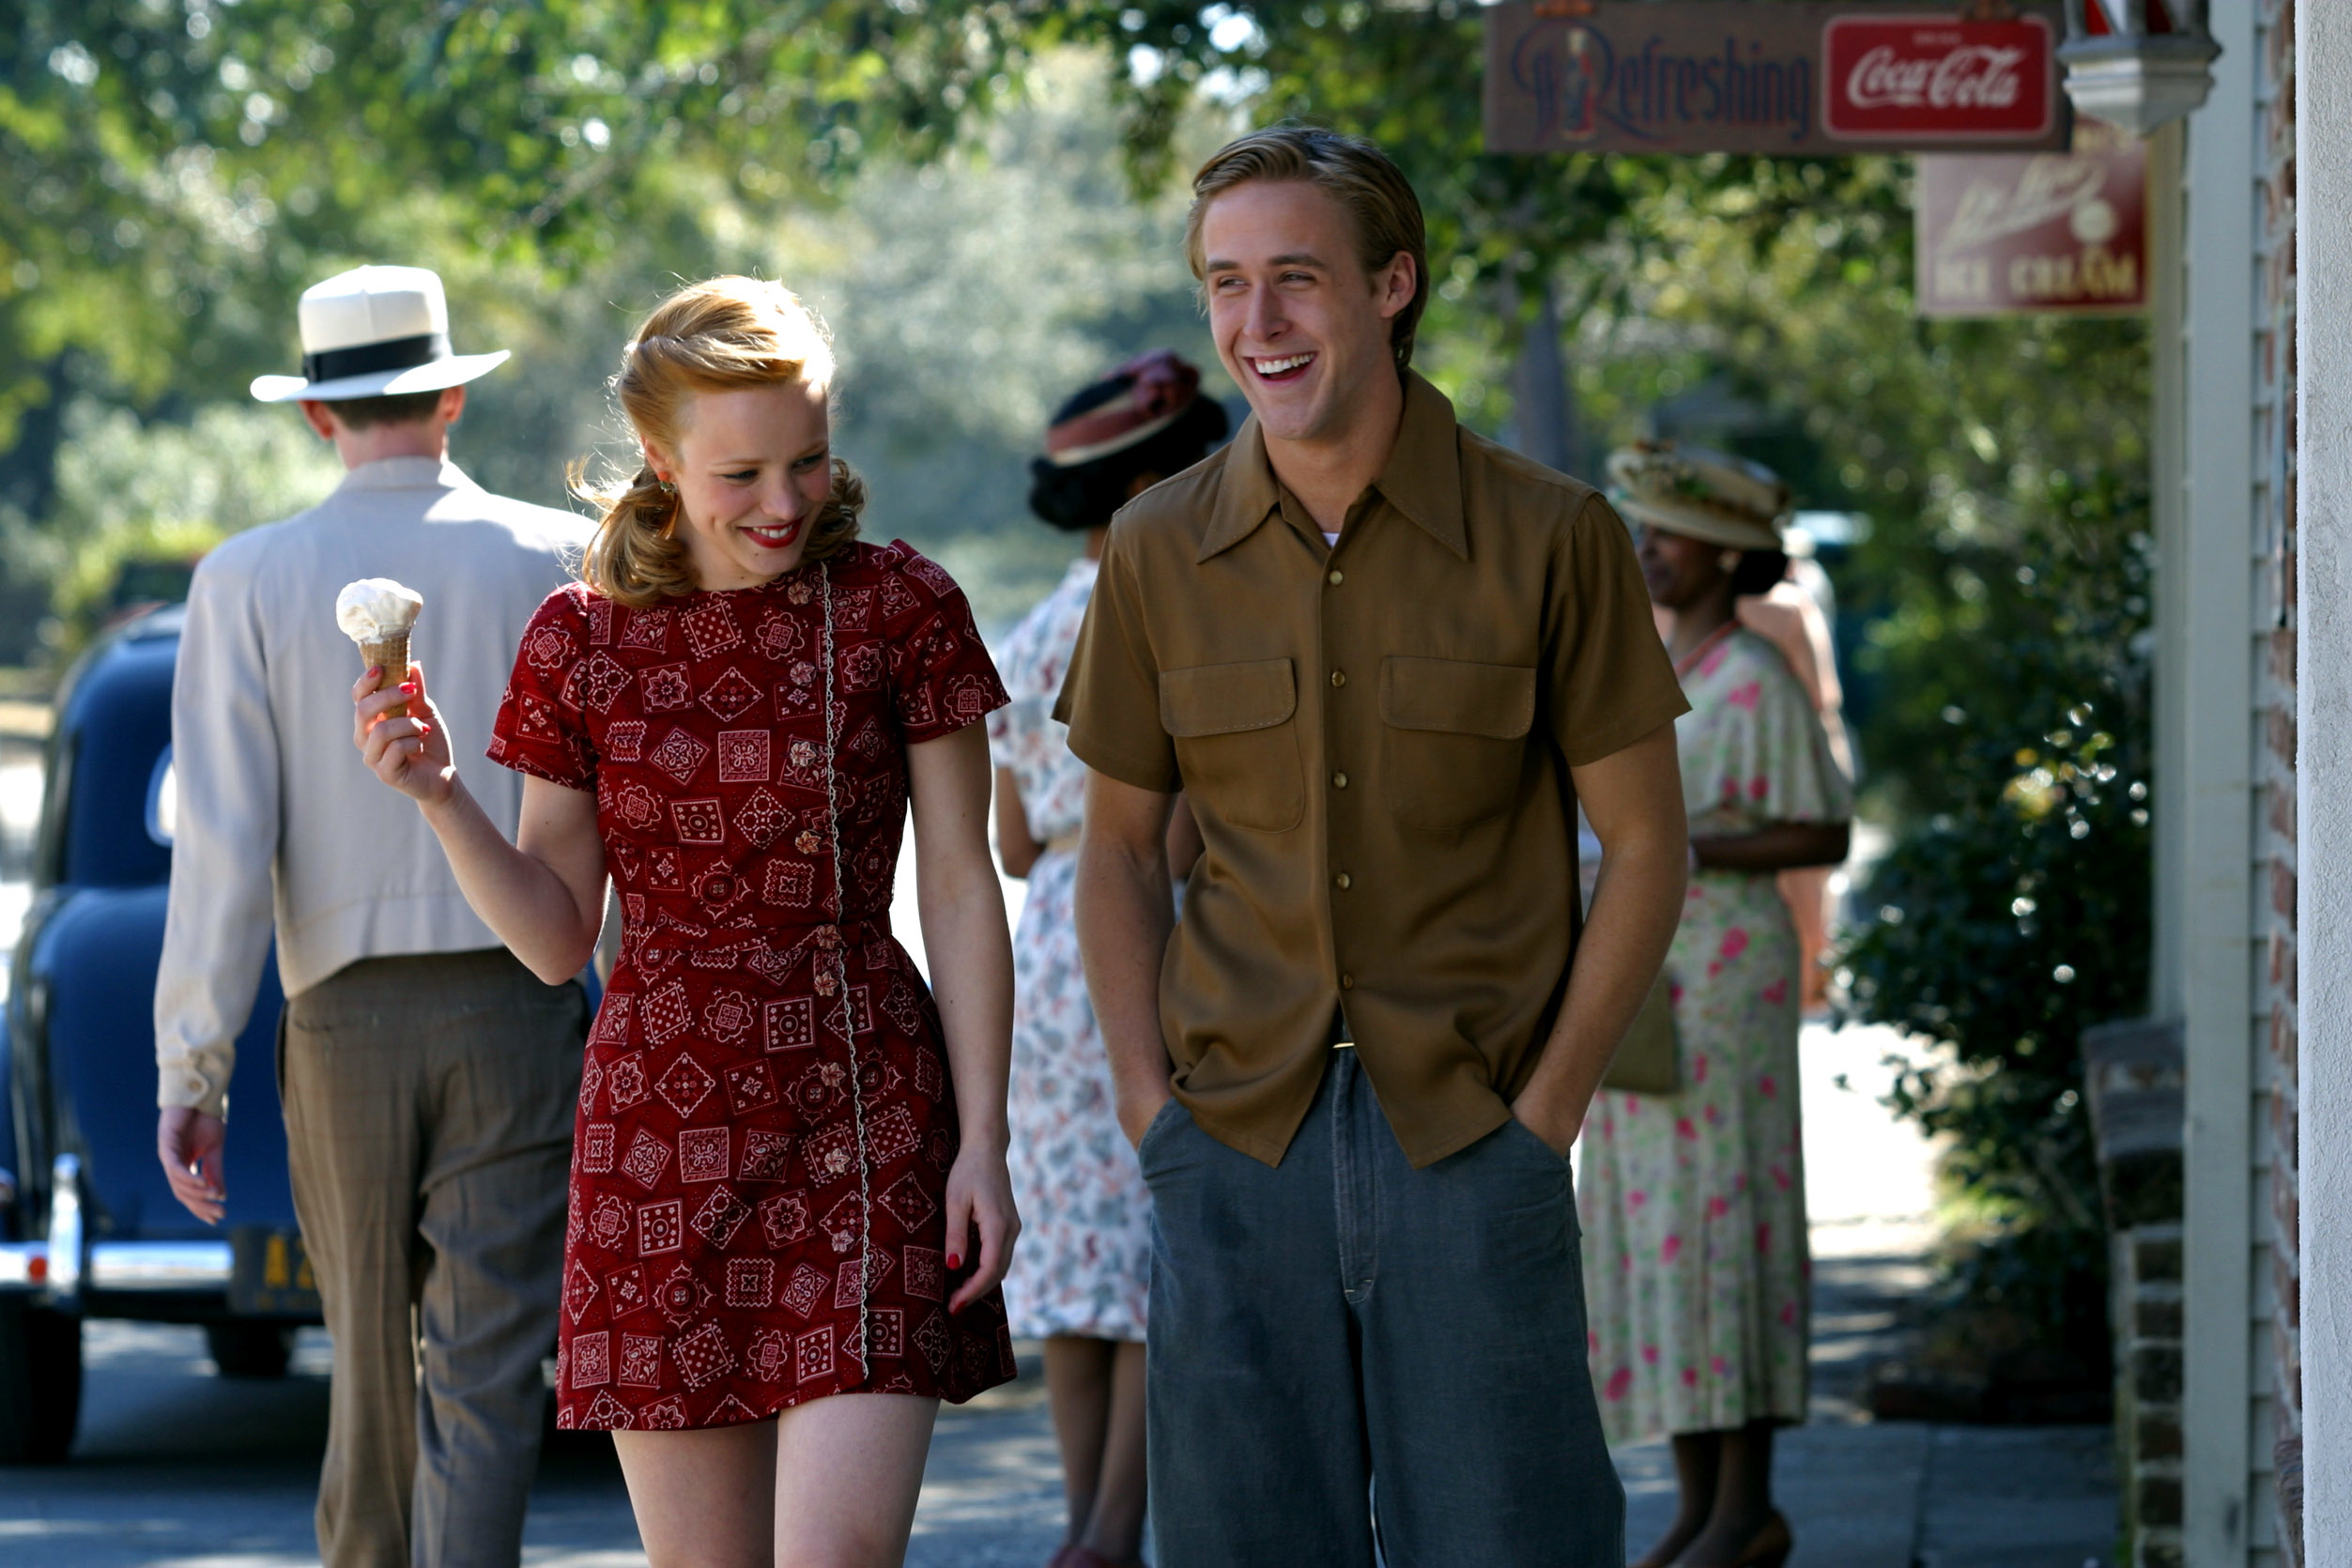 Noah and Allie walking and smiling with an ice cream cone